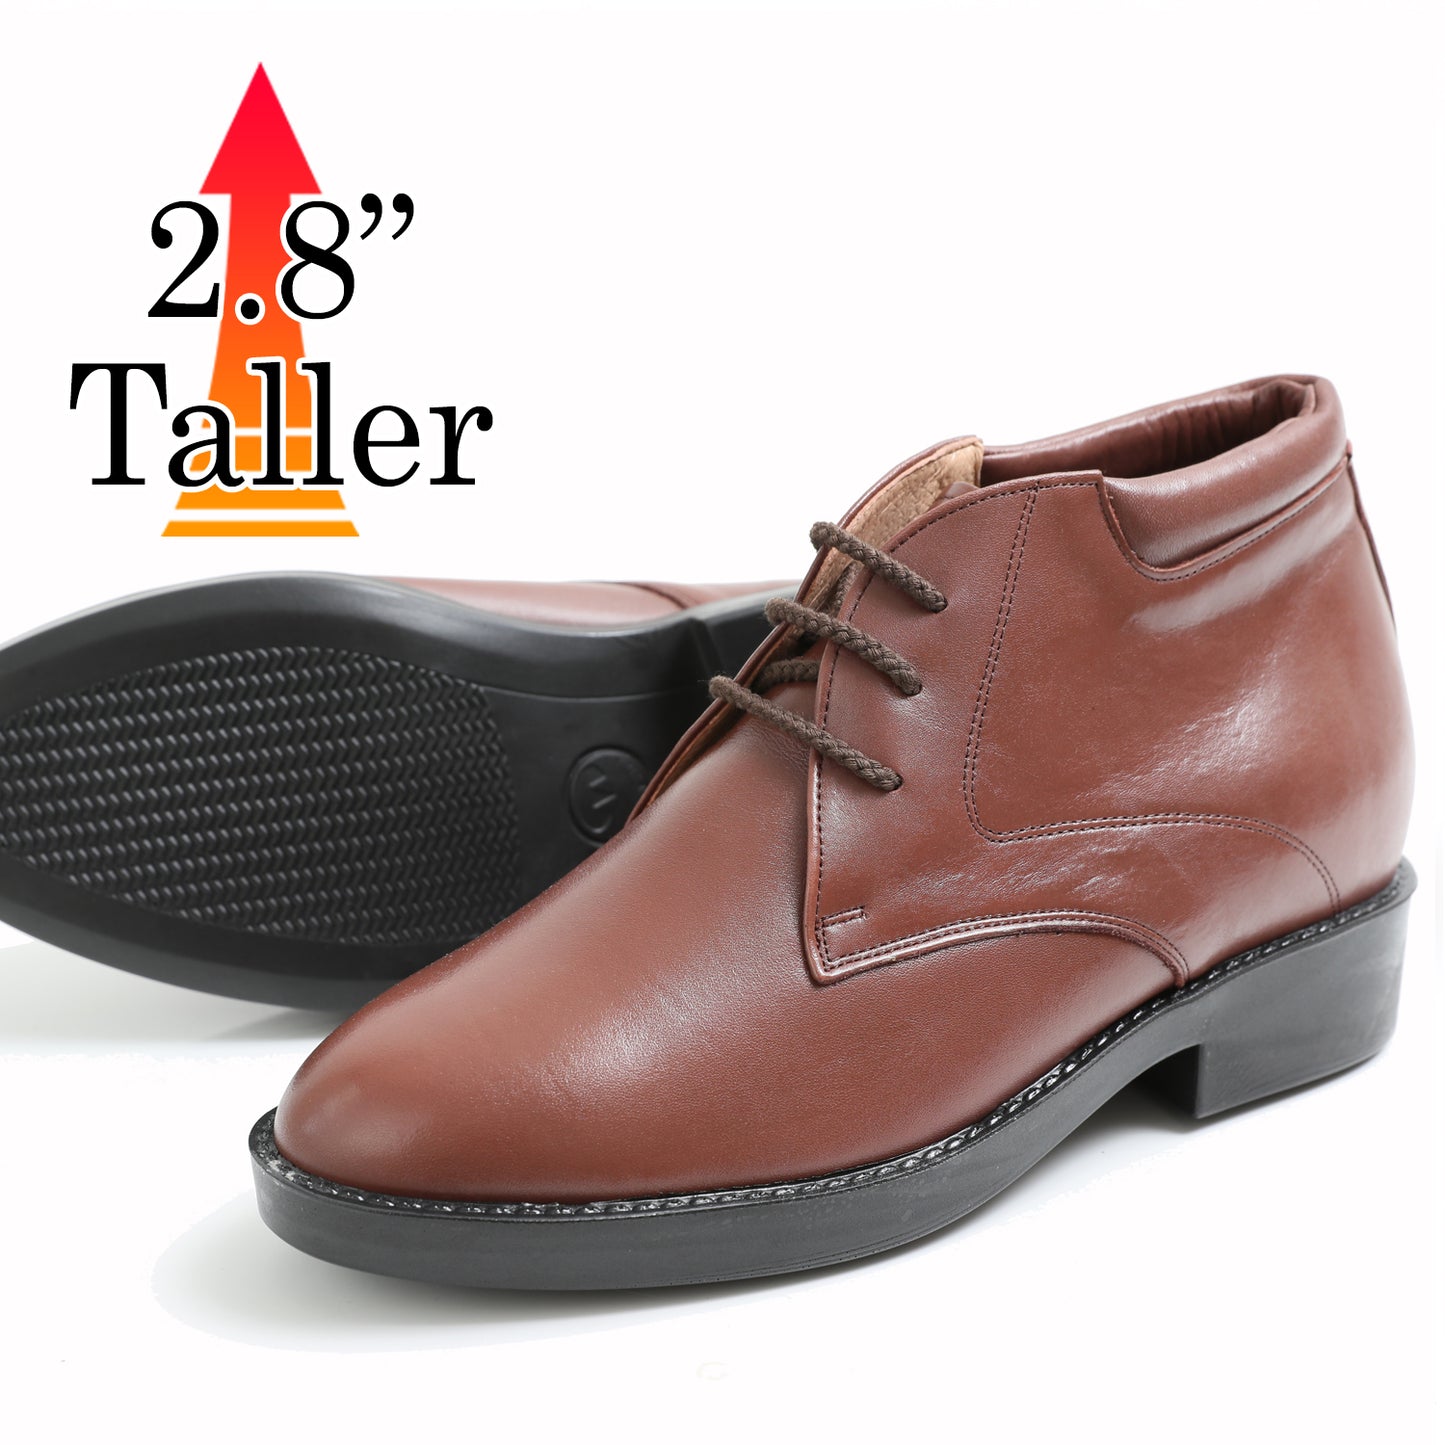 Men's Elevator Shoes Height Increasing 2.76" Taller Plain Toe Lace Up Ankle Desert Boots Genuine Leather No. 350